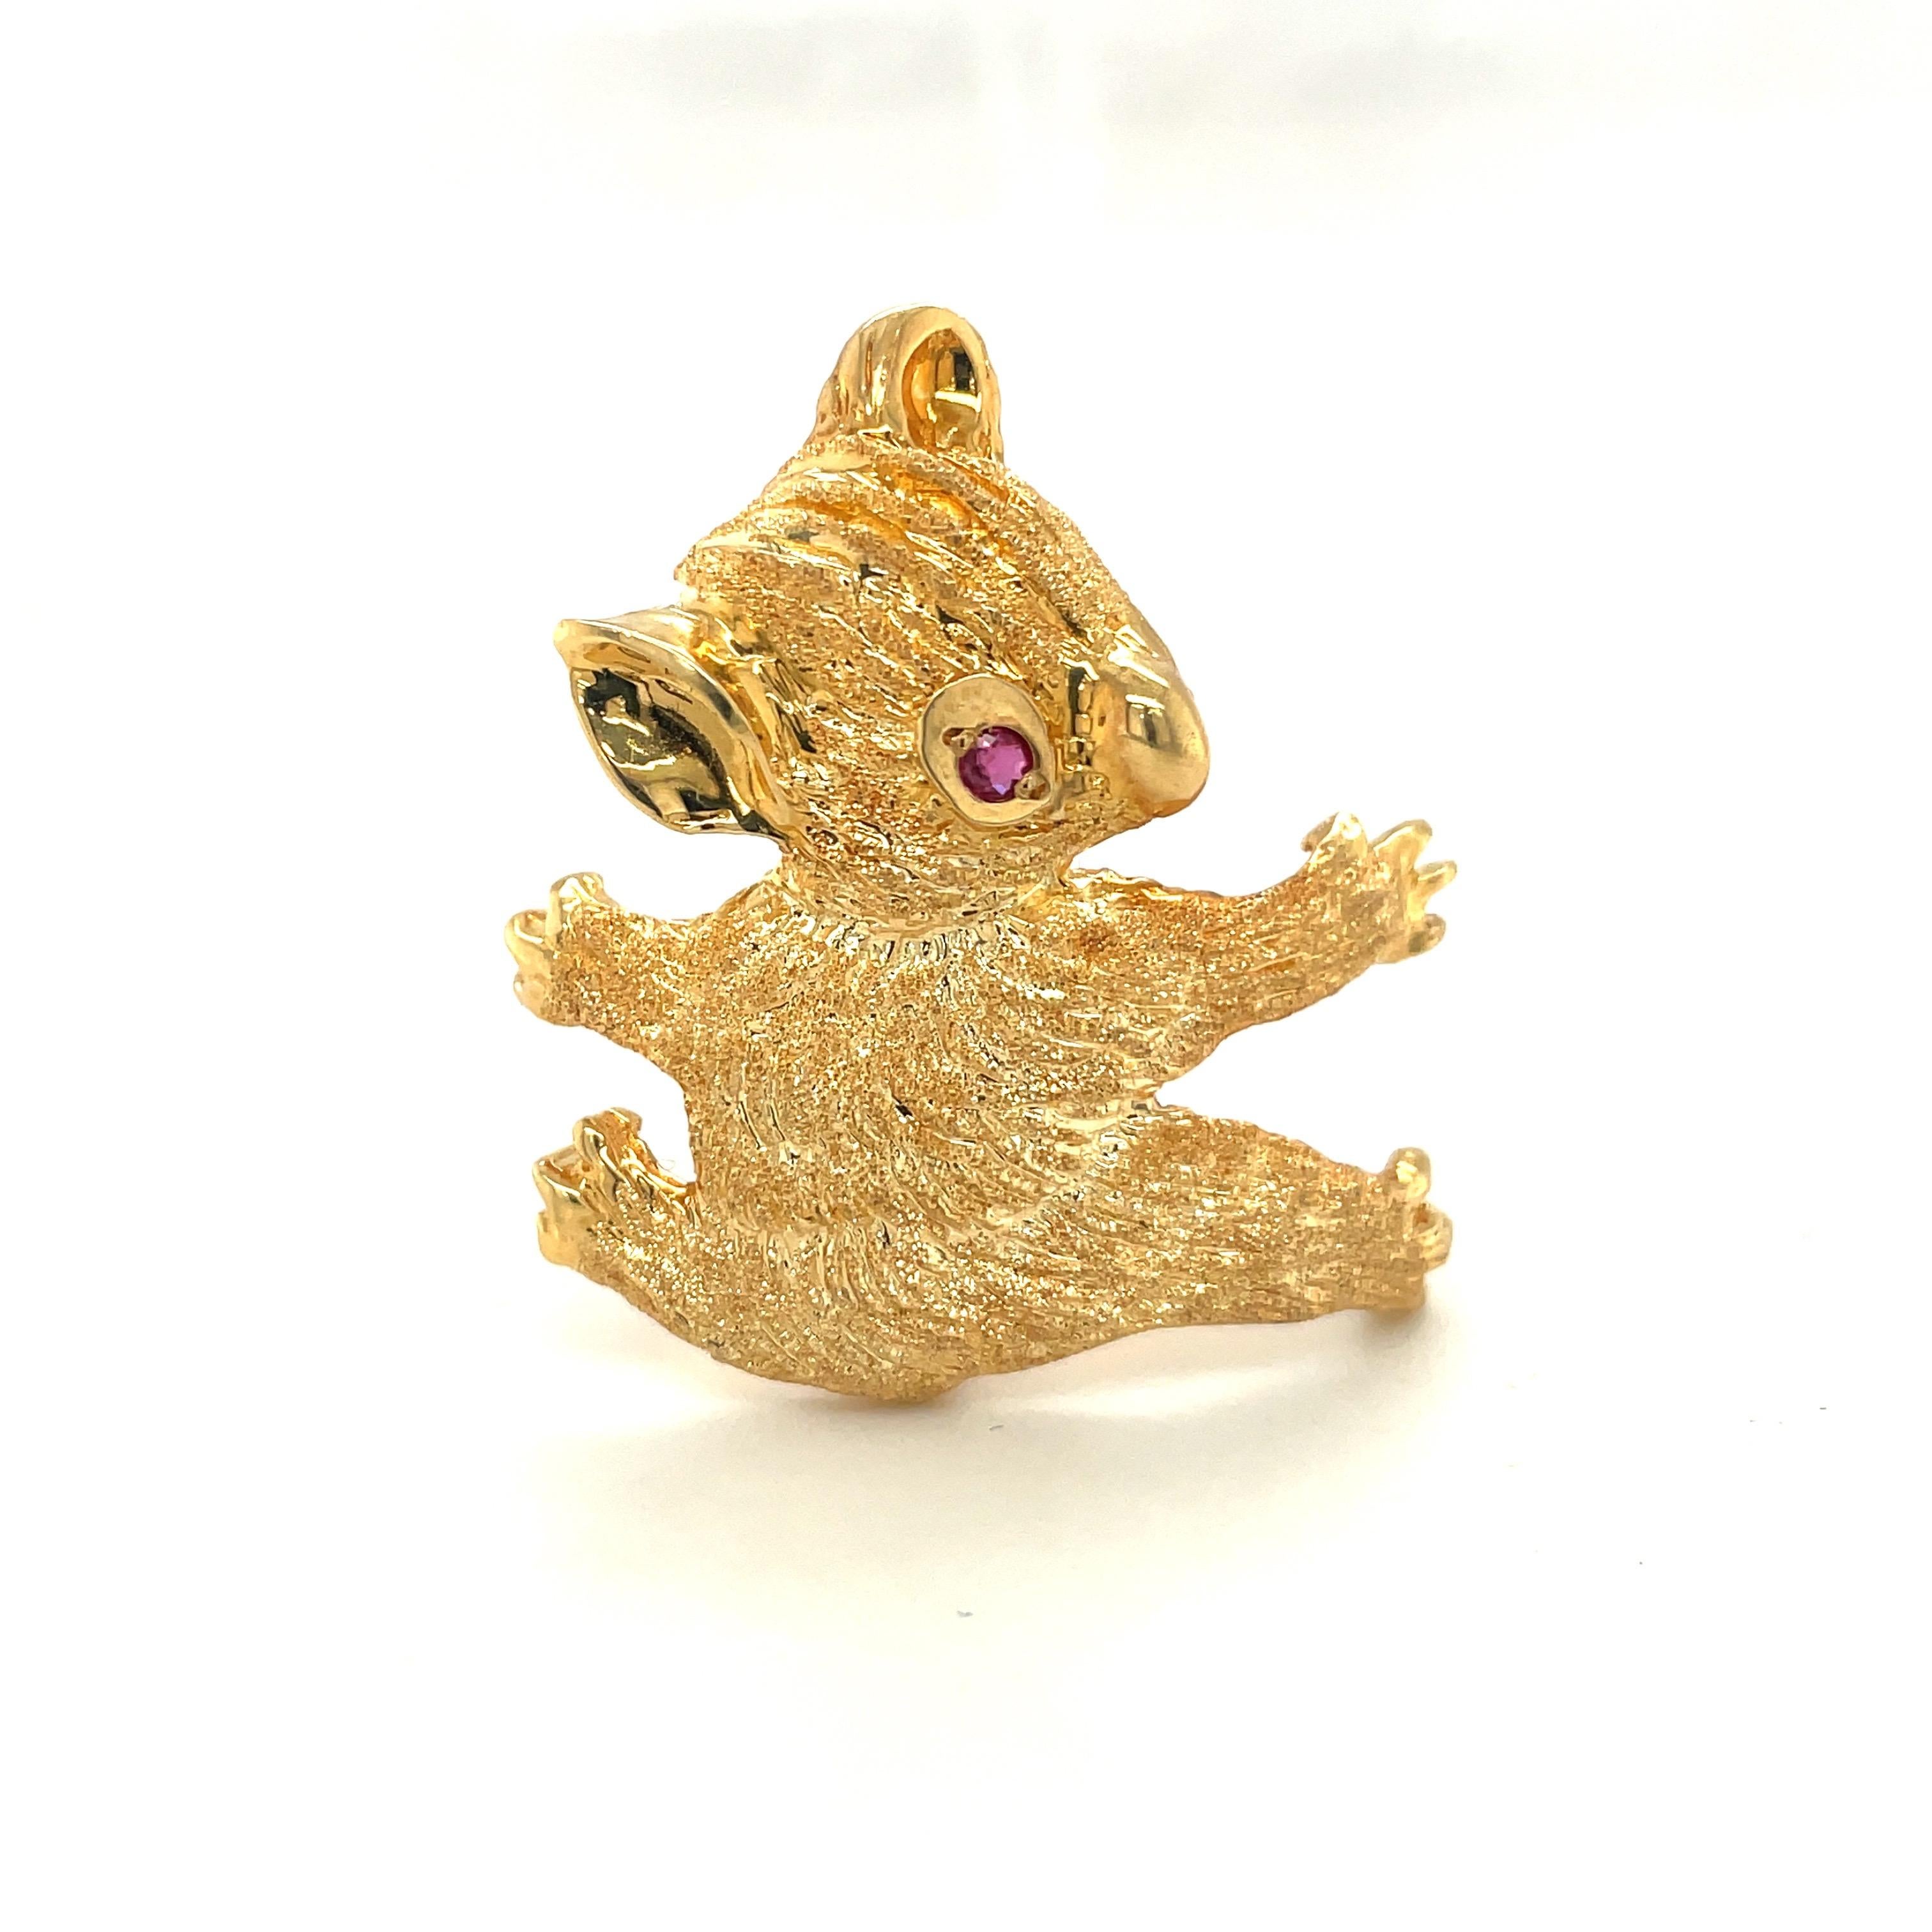 Retro 18KT Yellow Gold Panda Brooch with Ruby Eye For Sale